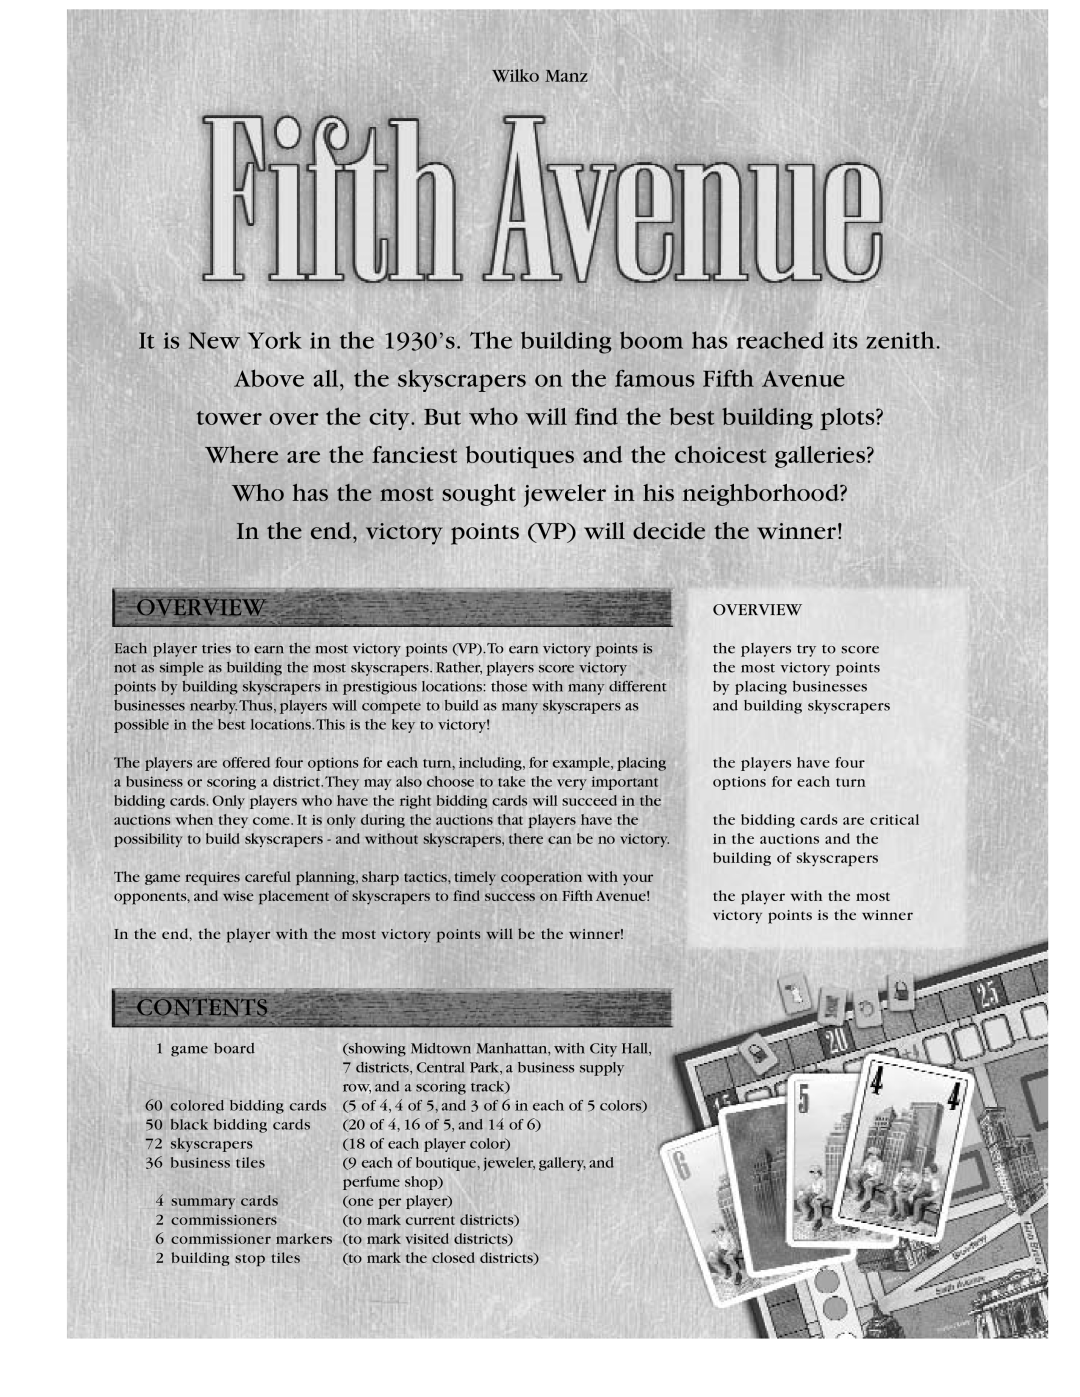 Rio Grande Games 5th Avenue manual Above all, the skyscrapers on the famous Fifth Avenue, Overview, Contents, Wilko Manz 